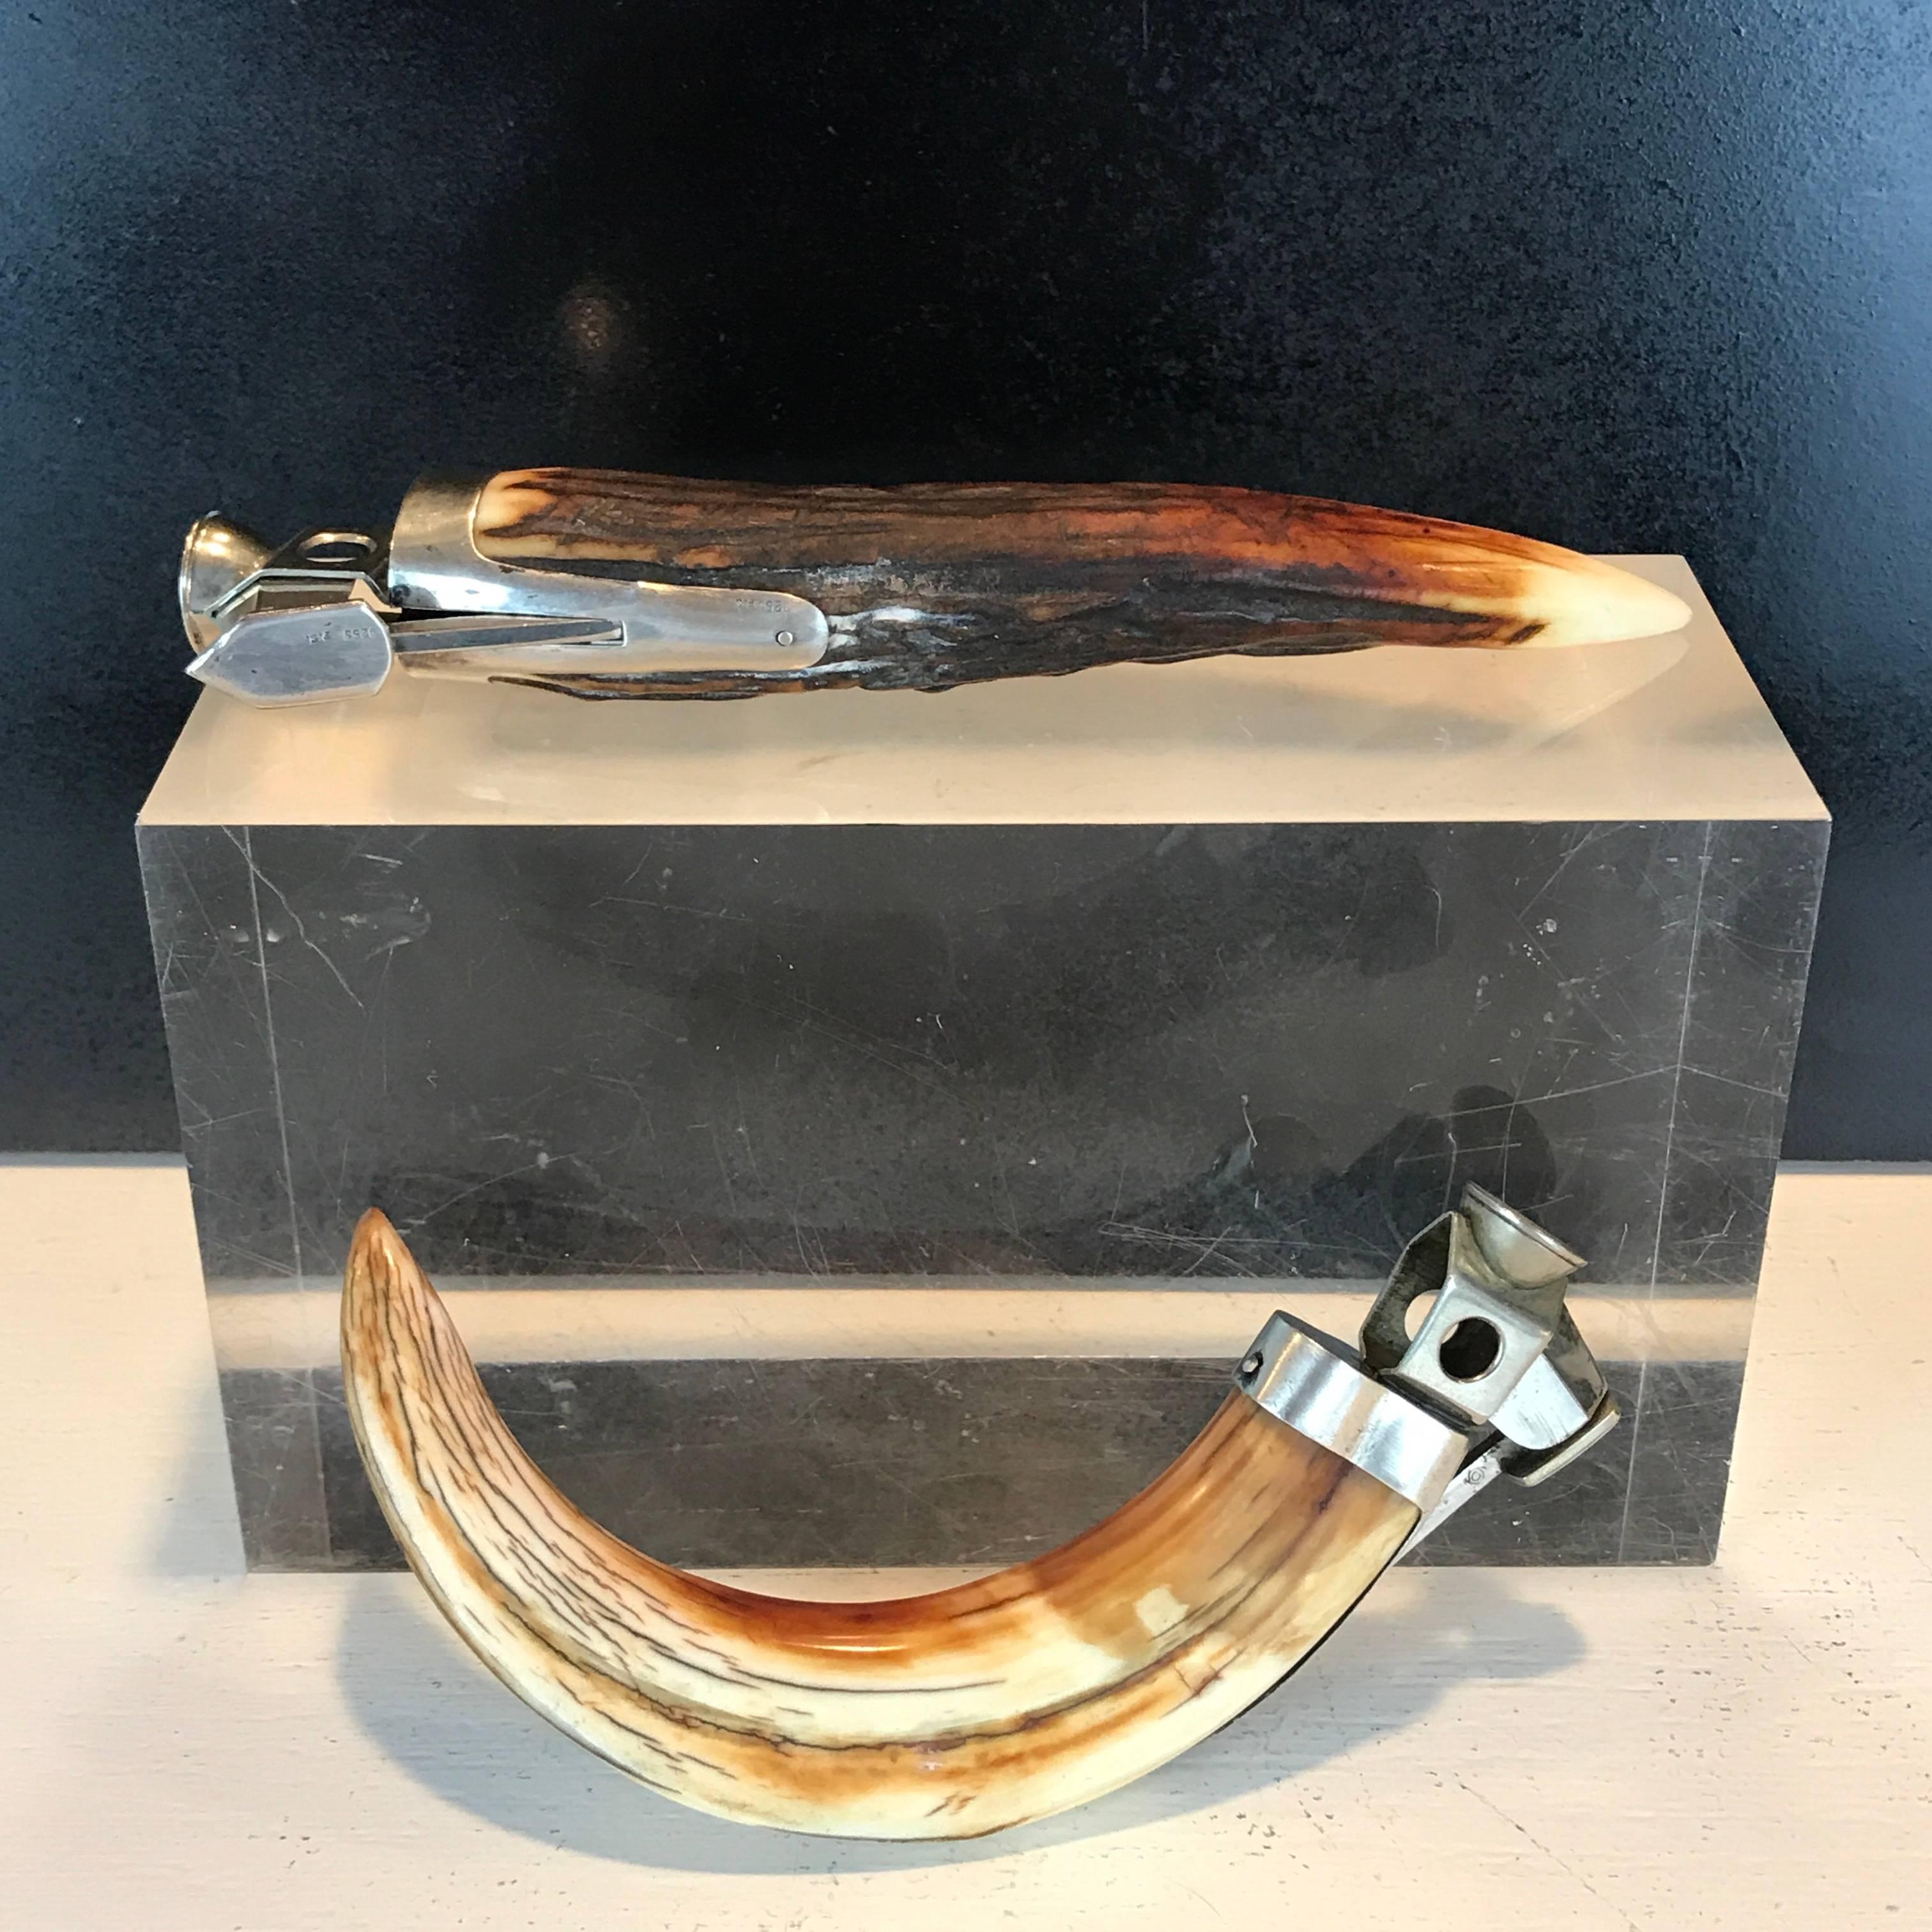 Two antique sterling mounted horn cigar cutters, each one with beautiful carved natural horn, and functioning
The curved cigar cutter measures 5.5